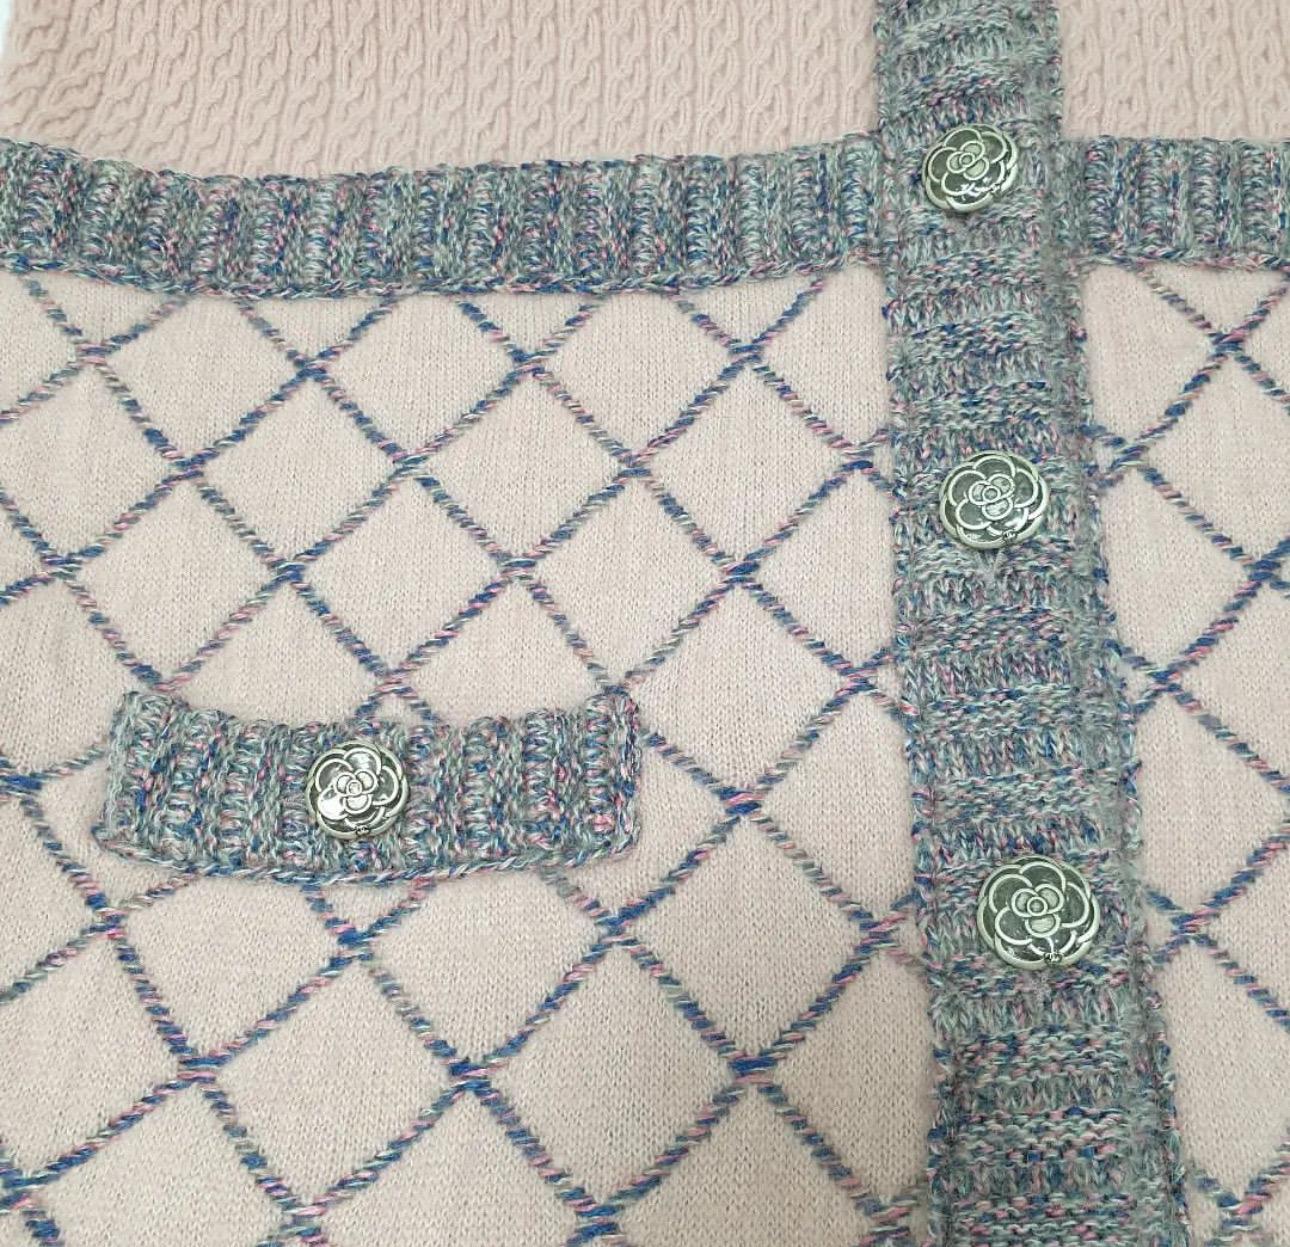 CHANEL Camellia Button Cardigan In Excellent Condition For Sale In Krakow, PL